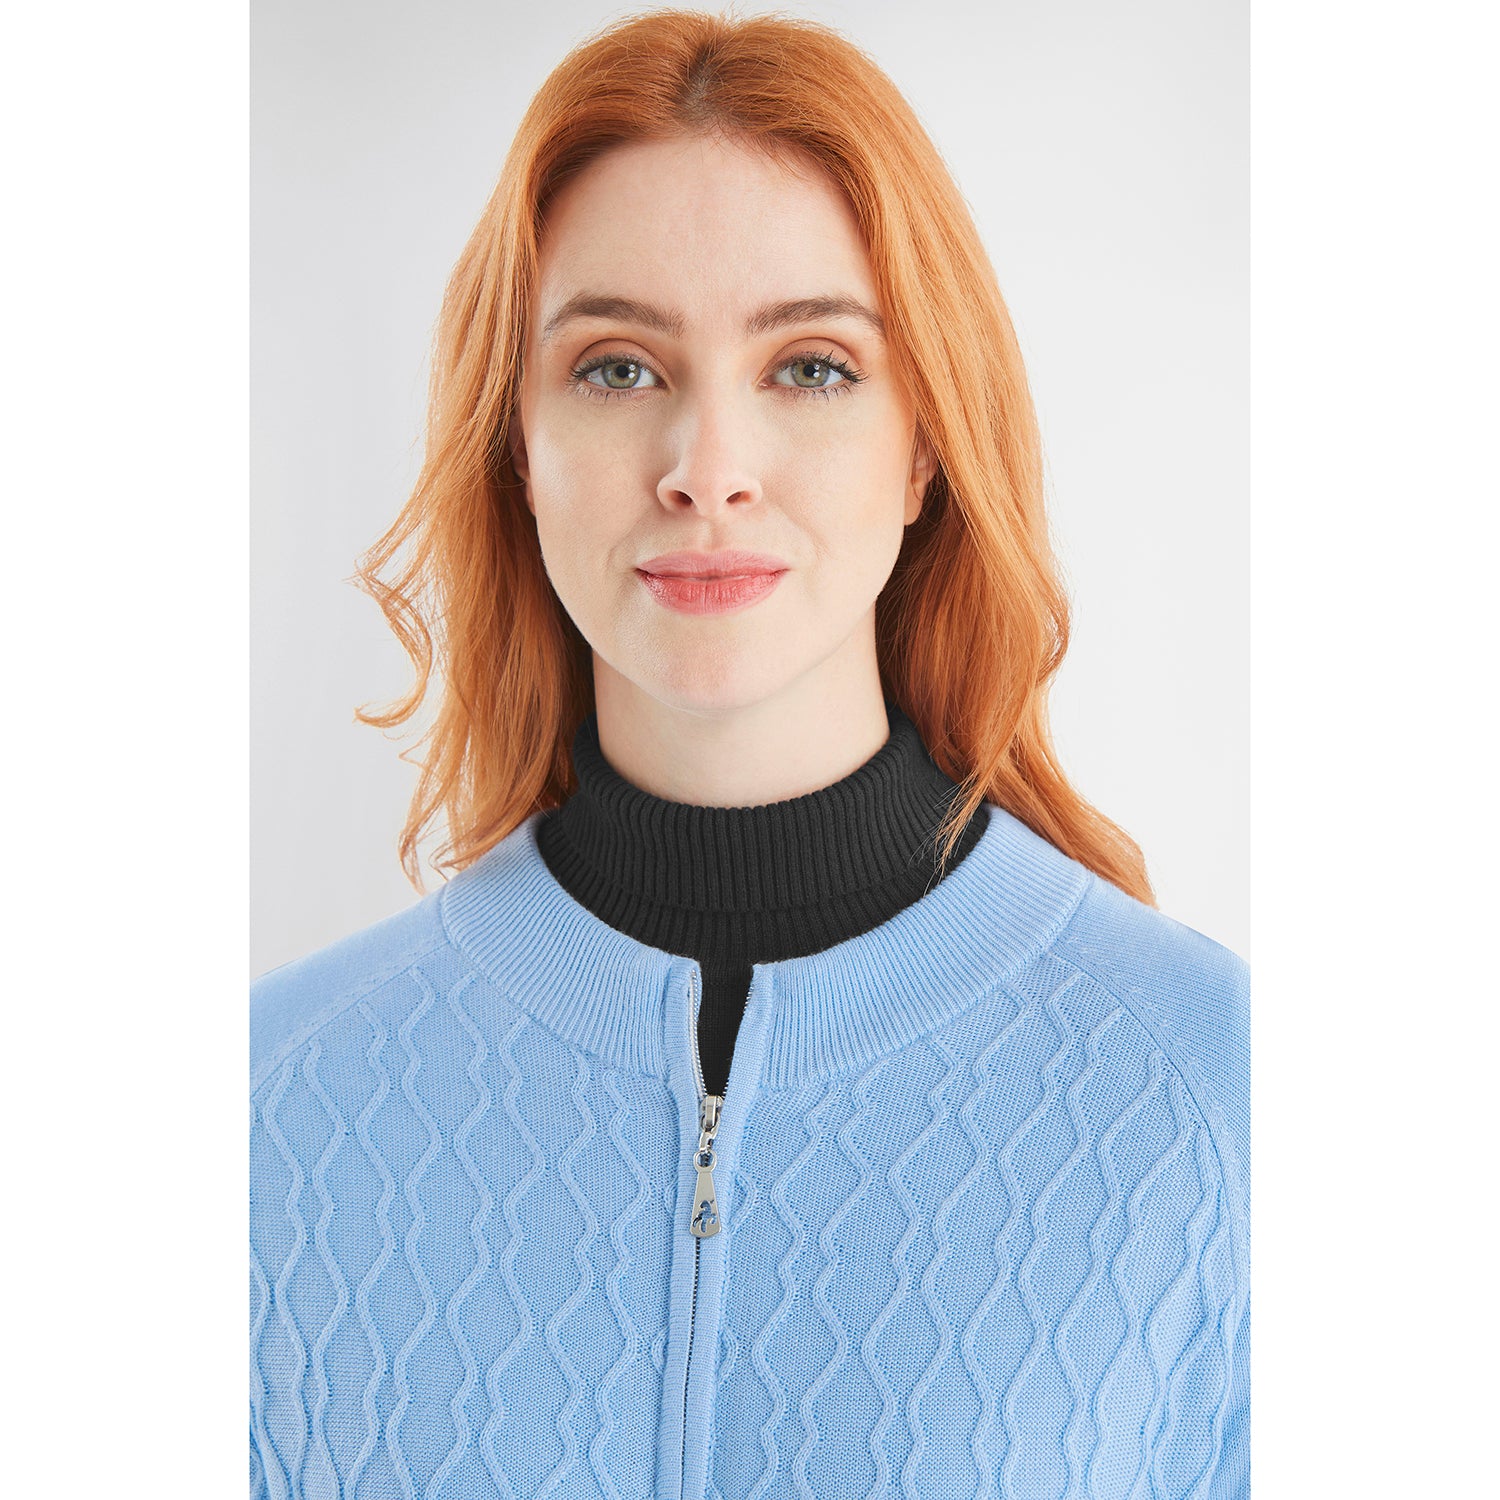 Green Lamb Ladies Lined Windstopper Cardigan with ZigZag Stitch Front Panel in Ice Blue